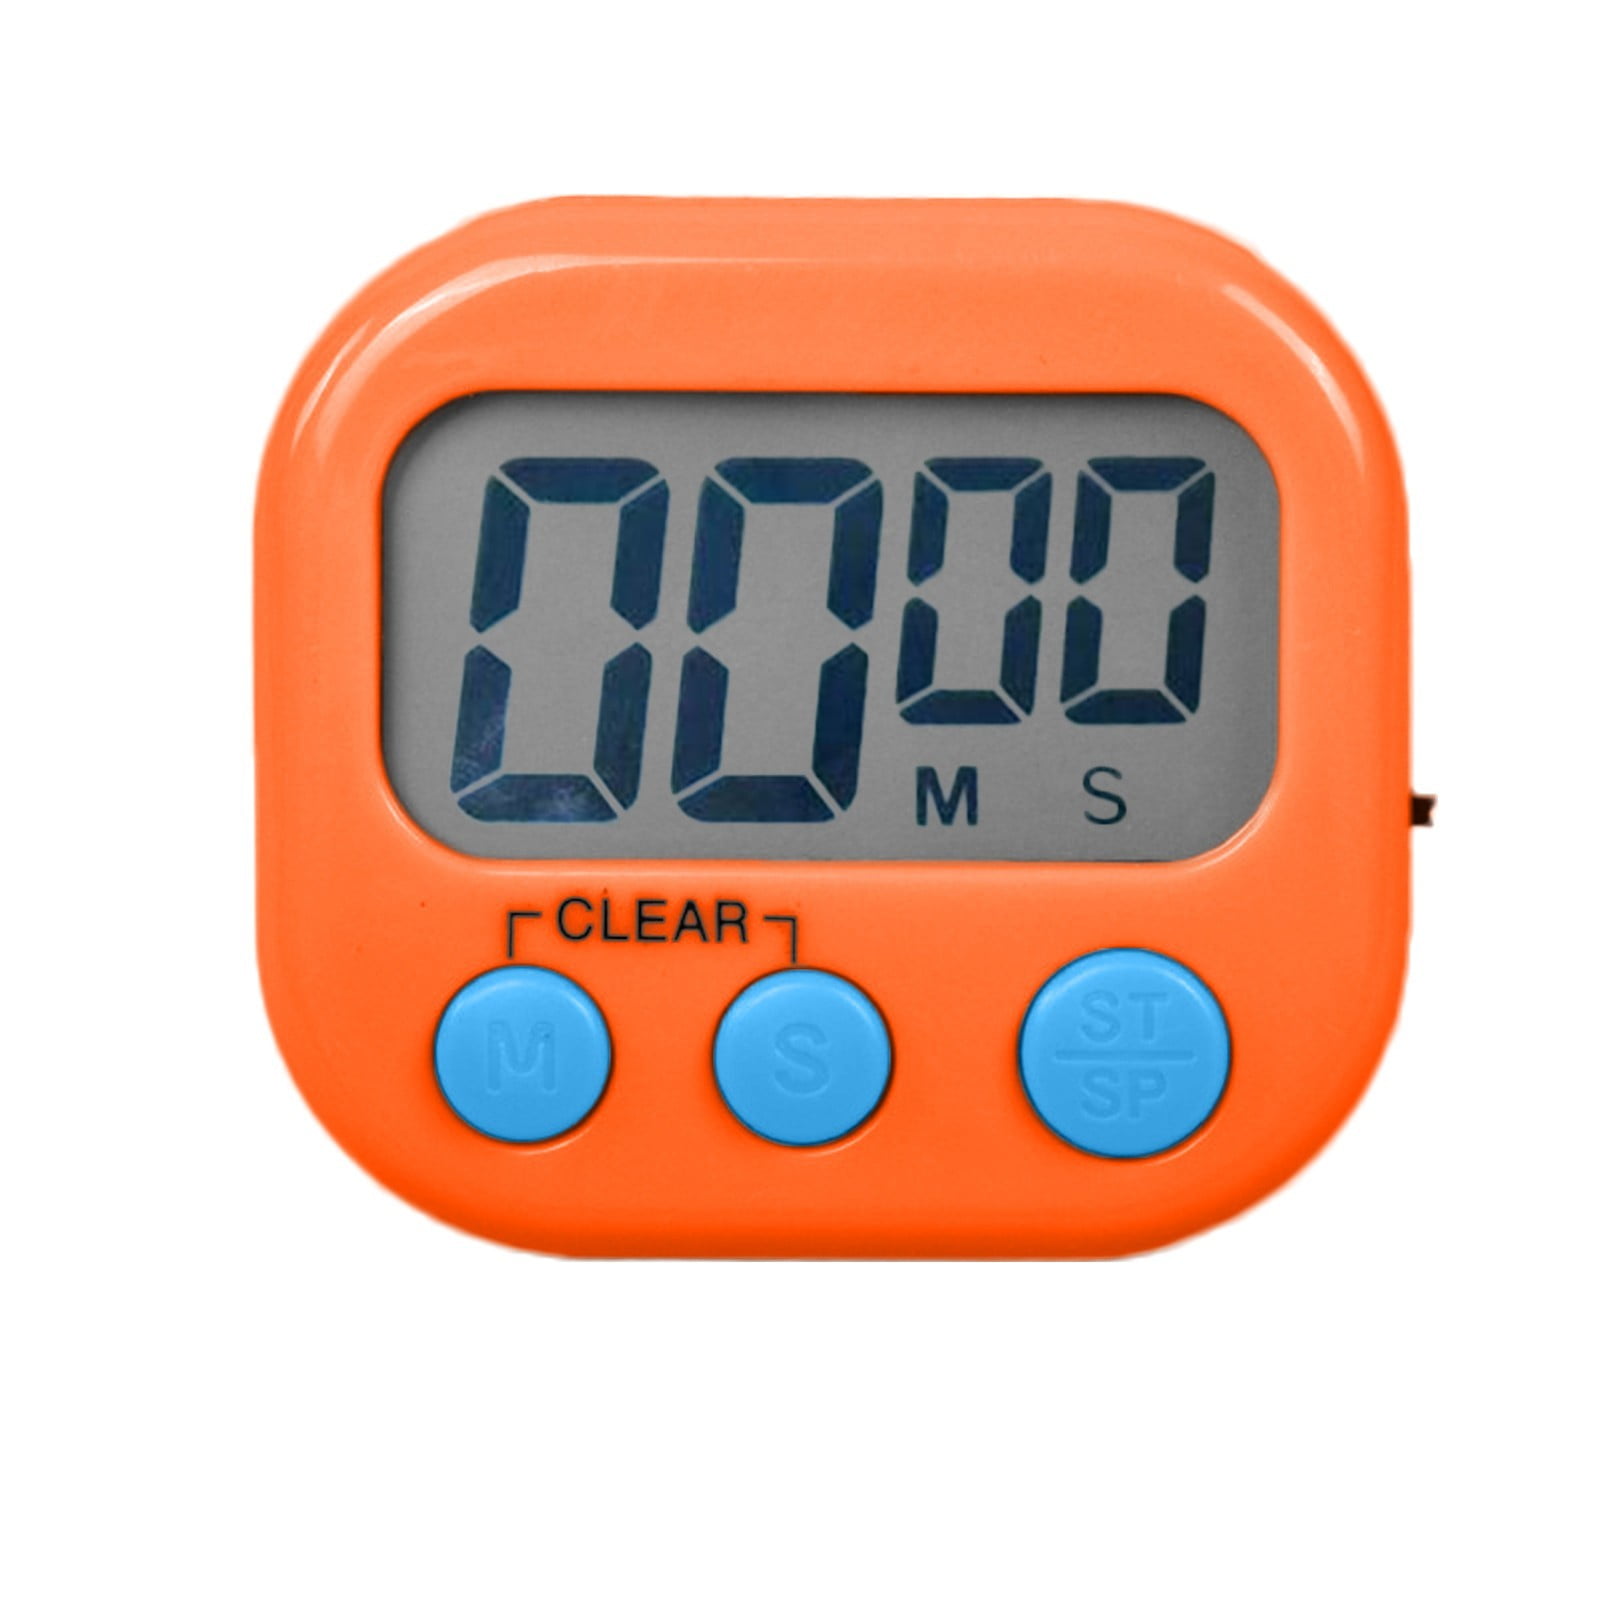 Large Display Digital Timer LED Magnetic Kitchen Cooking Countdown Timer  Study Stopwatch - Black Wholesale